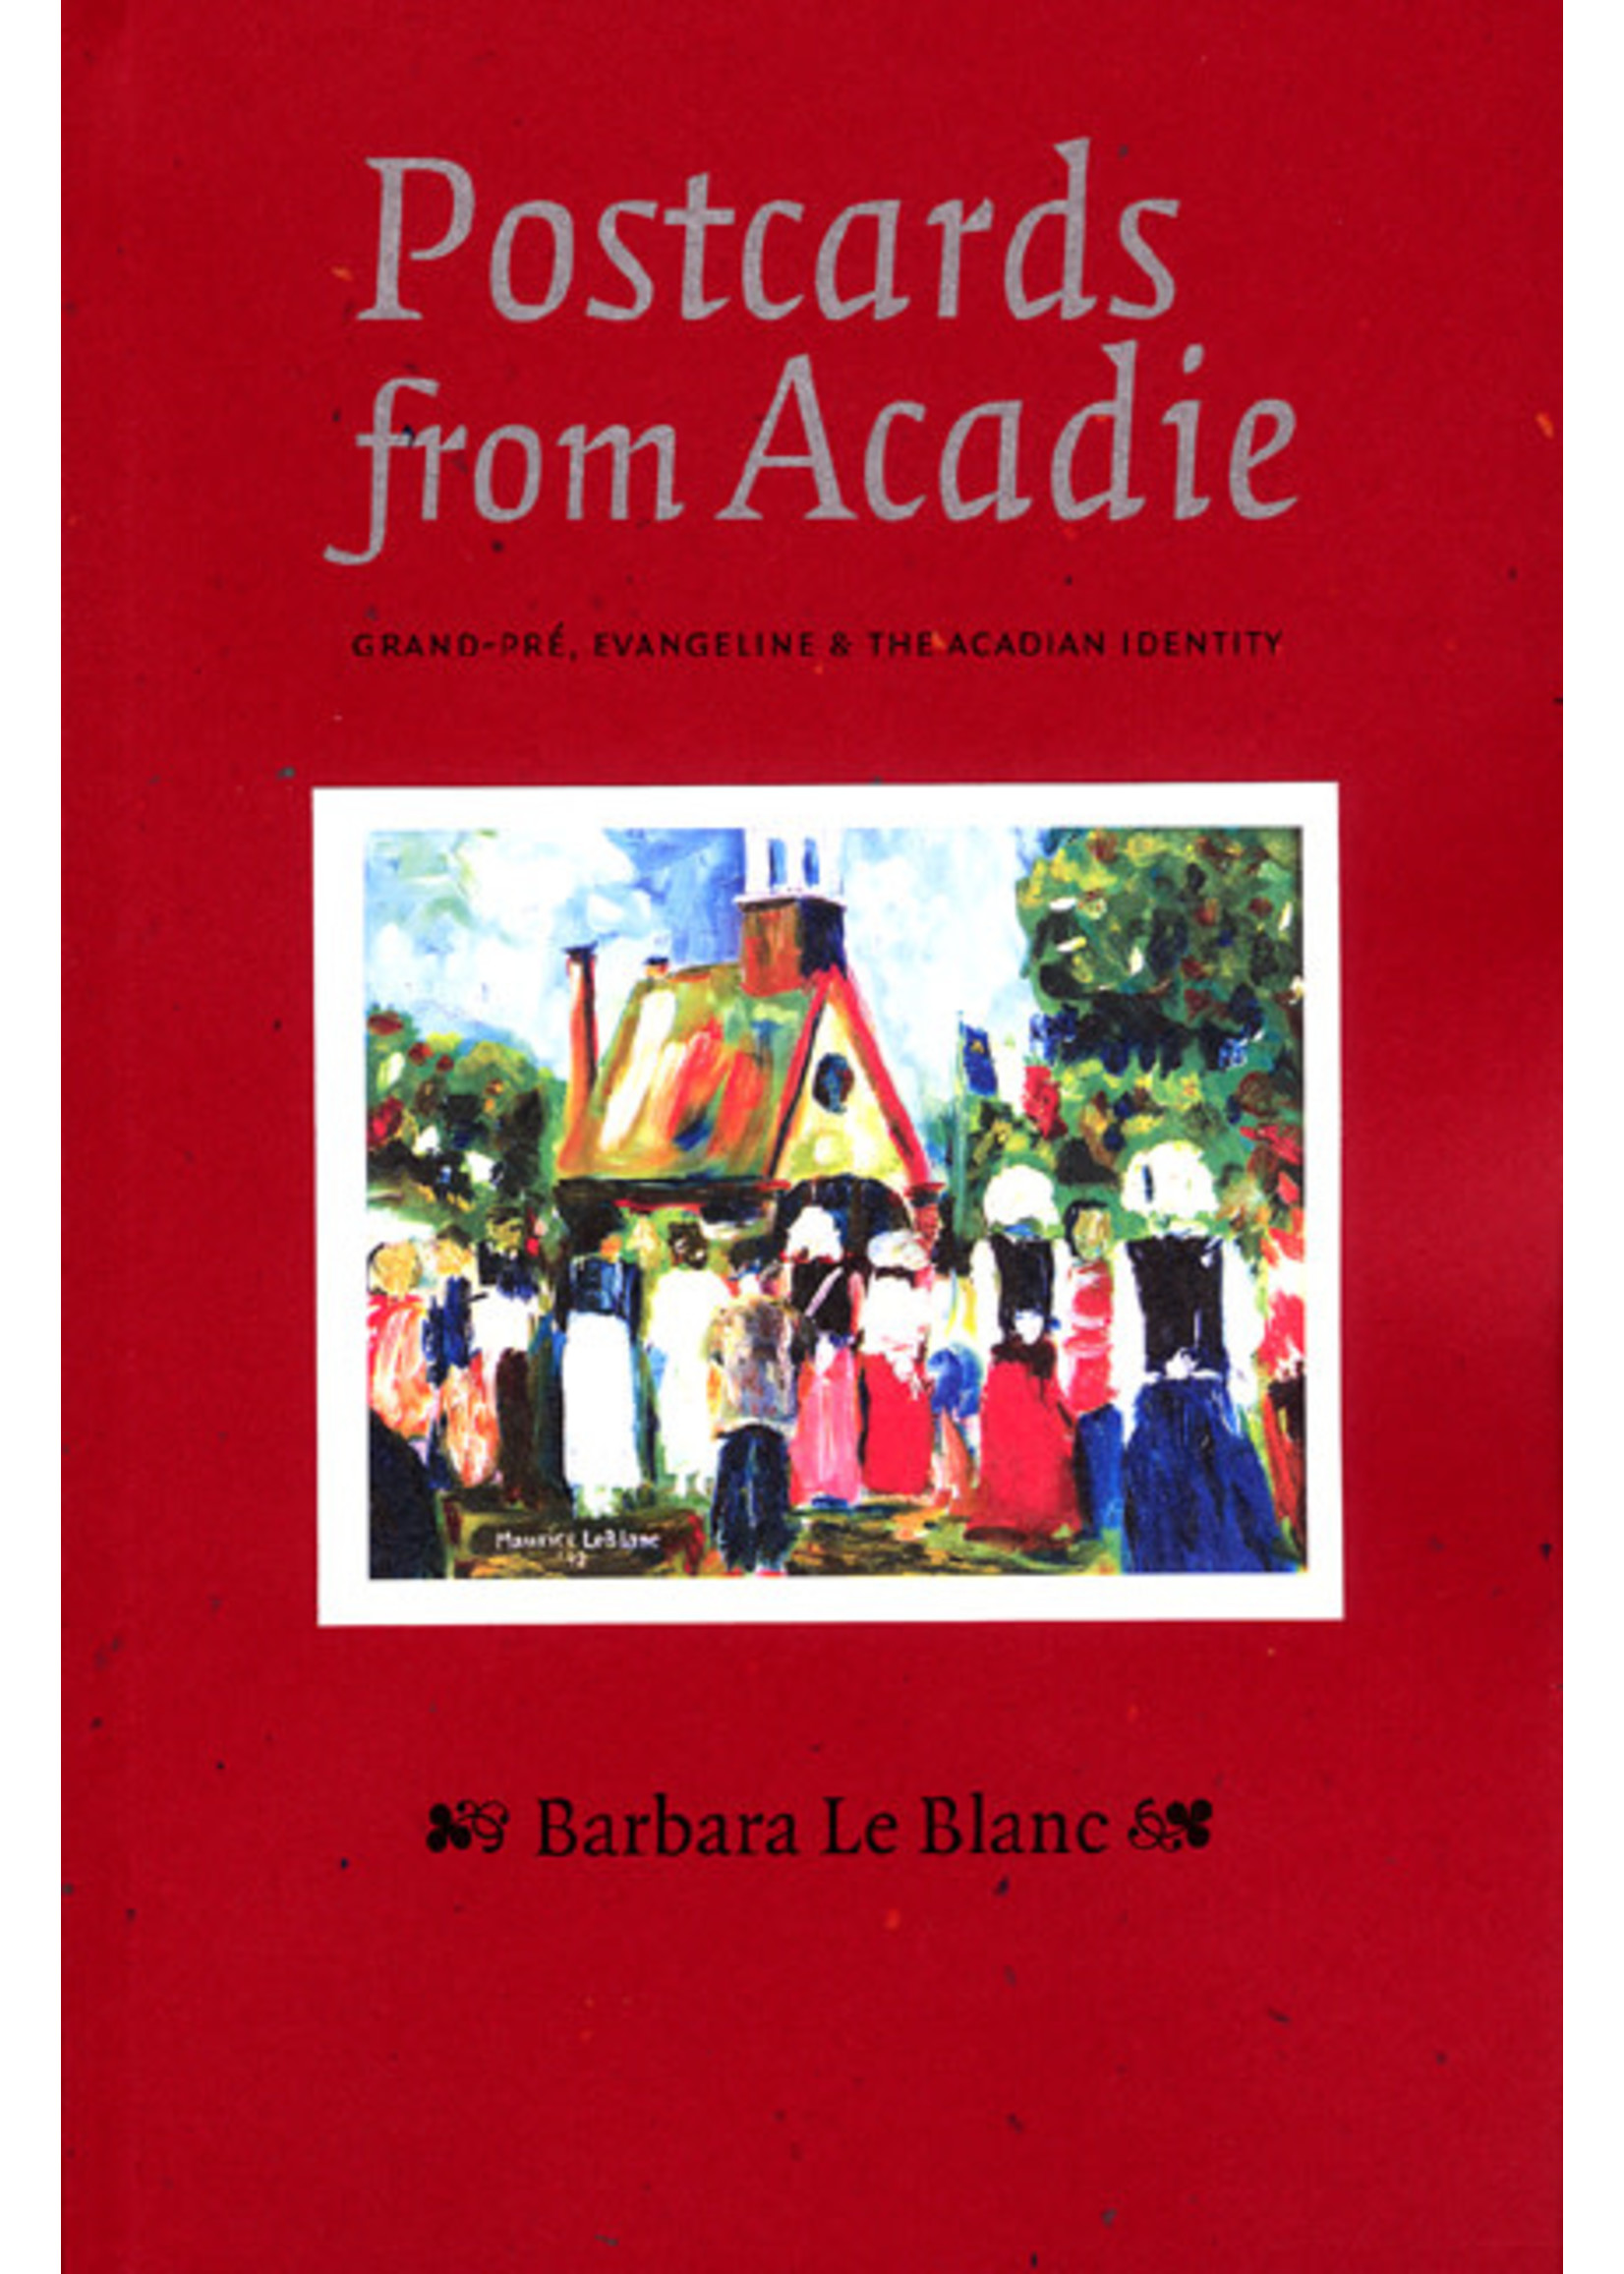 Postcards from Acadie: Grand-Pré, Evangeline and The Acadian Identity by Barbara Le Blanc